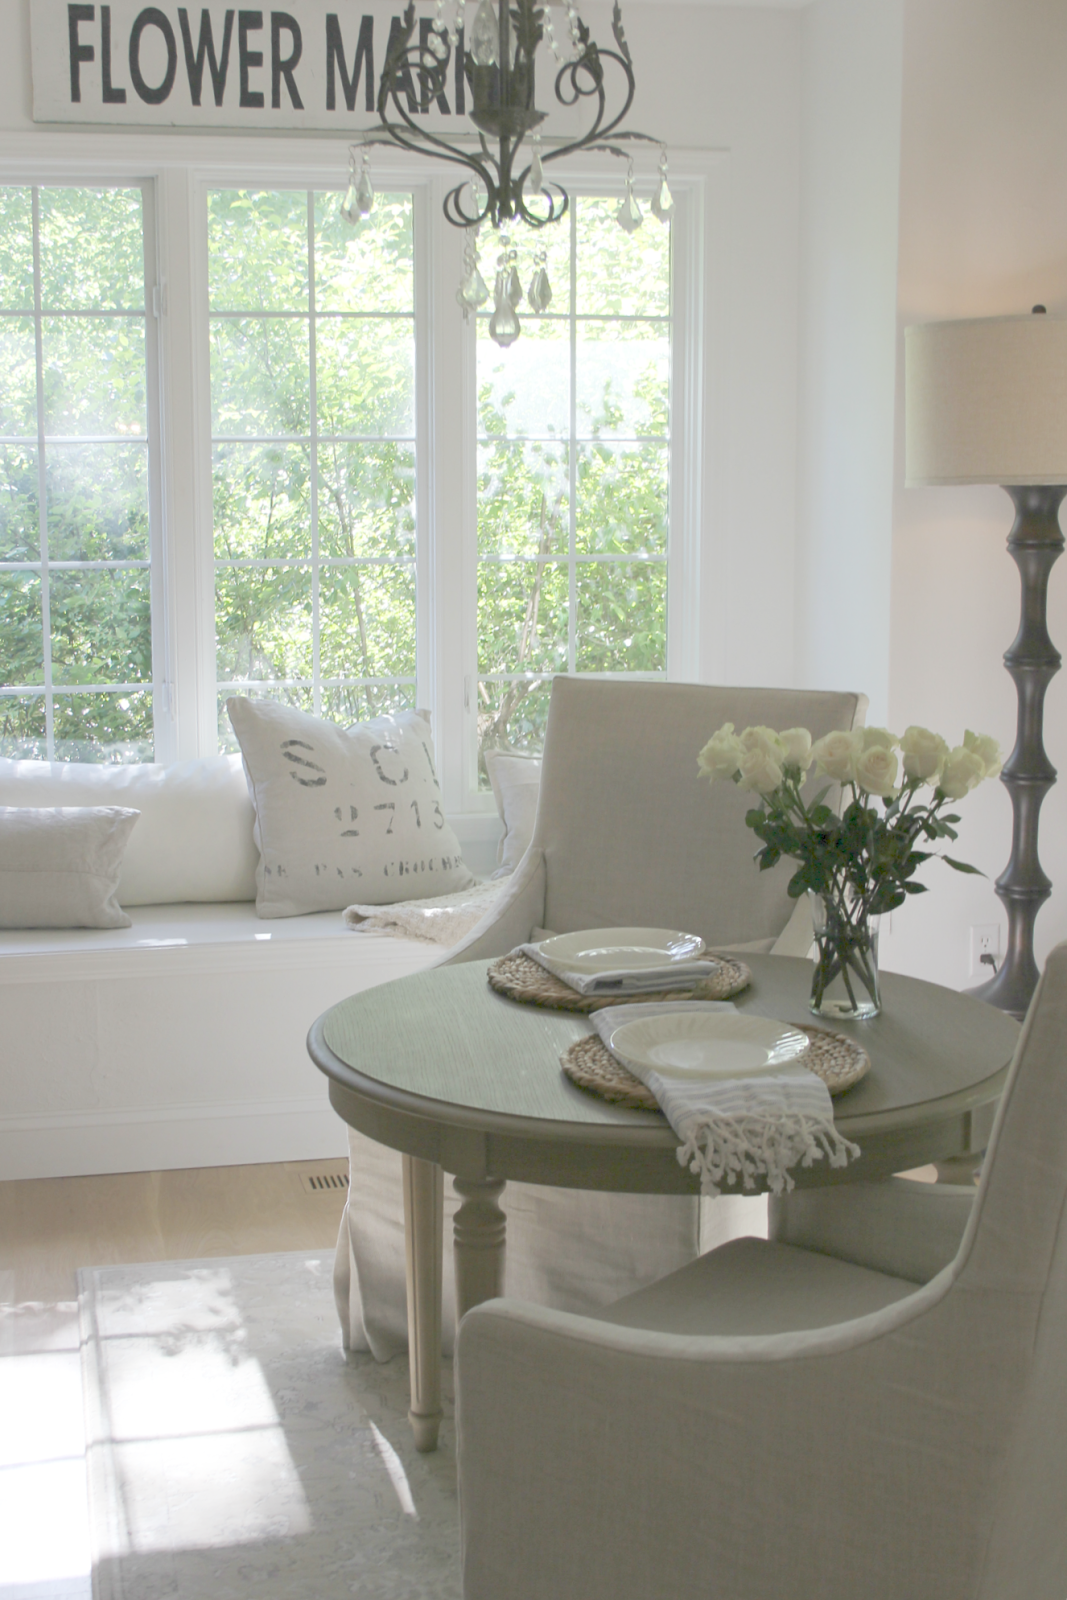 Serene breakfast room with window seat, round dining table, Belgian linen slipcovered arm chairs, and vintage Flower Market sign. Come be inspired on Hello Lovely by 7 Low Cost Timeless Decorating Ideas That Don't Involve the Dollar Store As Well As Photos Around My House.